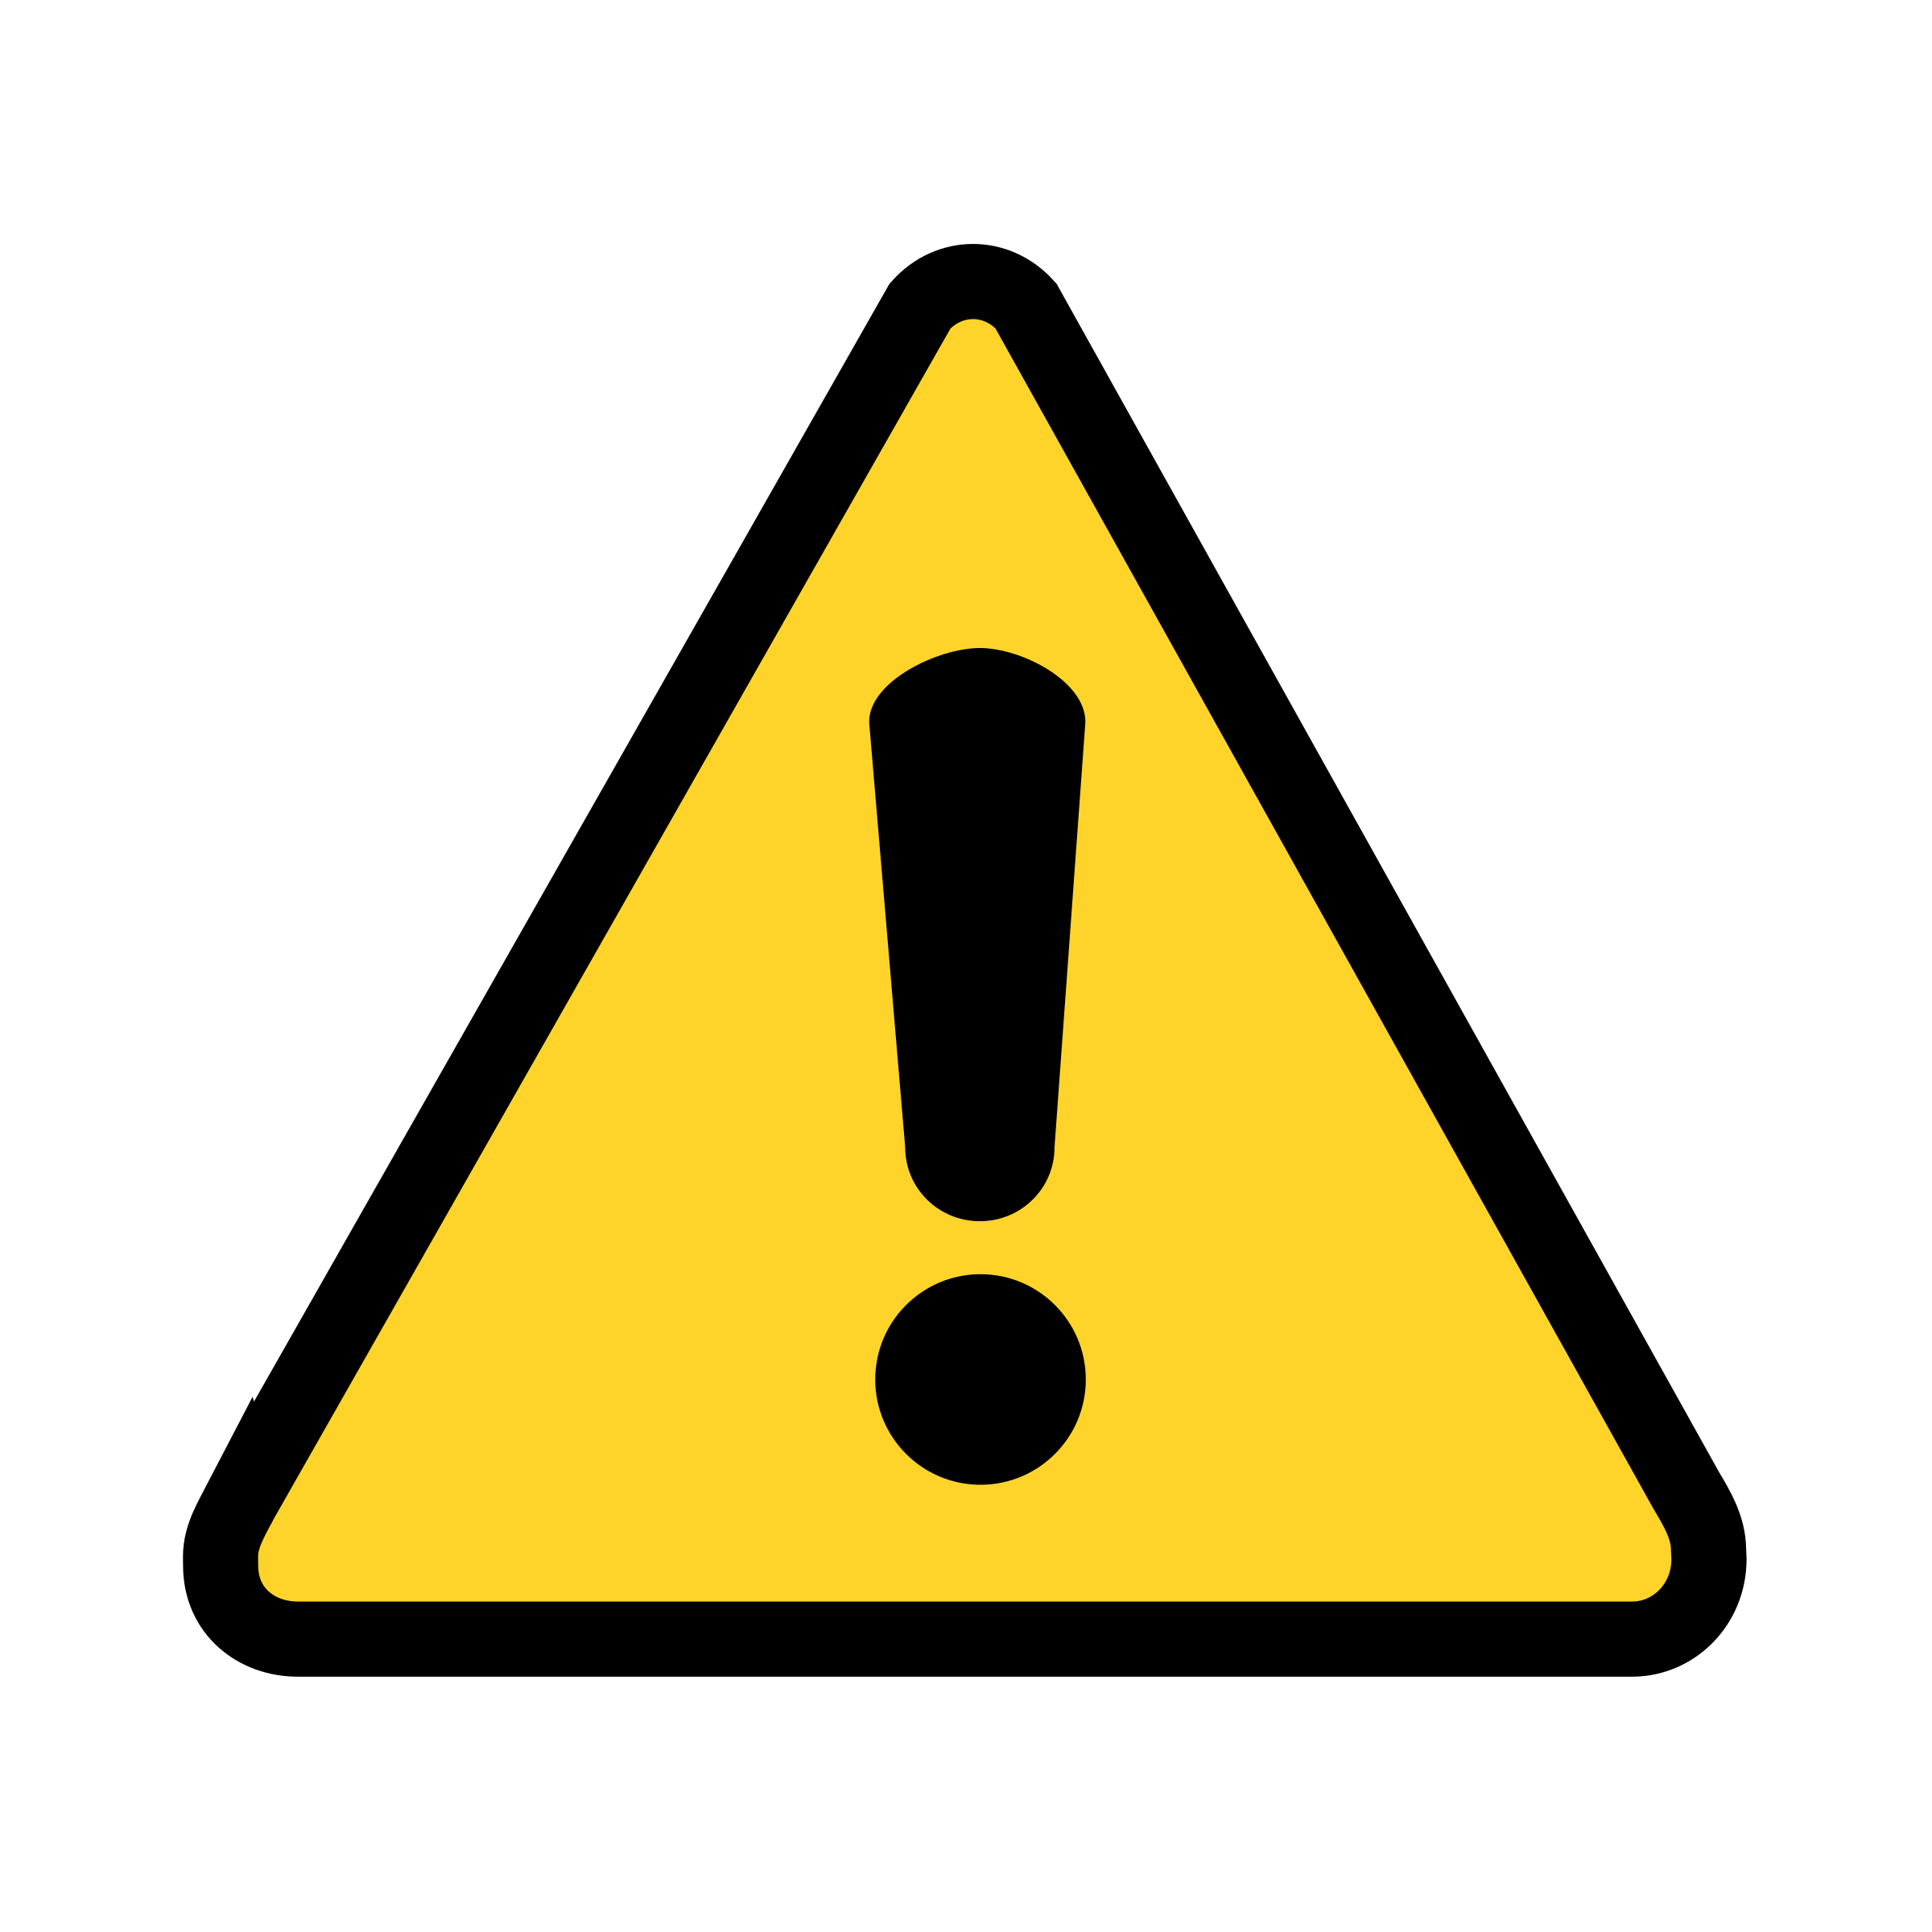 Attention Sign Png Hdpng.com 2400 - Attention Sign, Transparent background PNG HD thumbnail